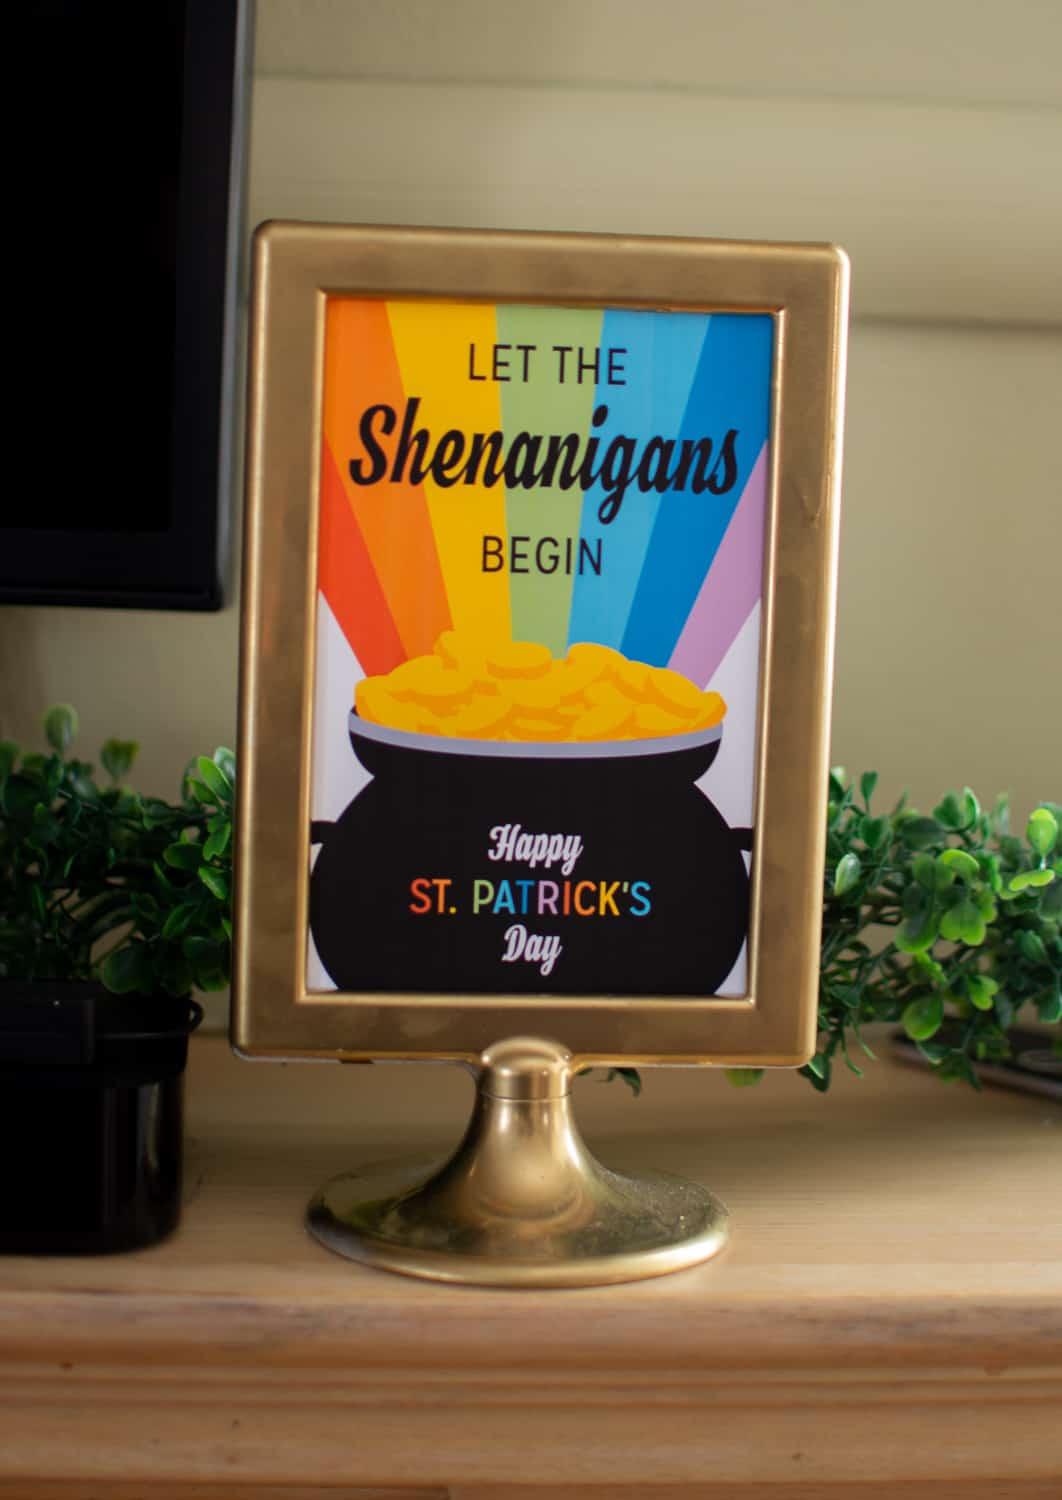 Who doesn't love some shenanigans for St. Patrick's Day? Free printable available at elvamdesign.com.